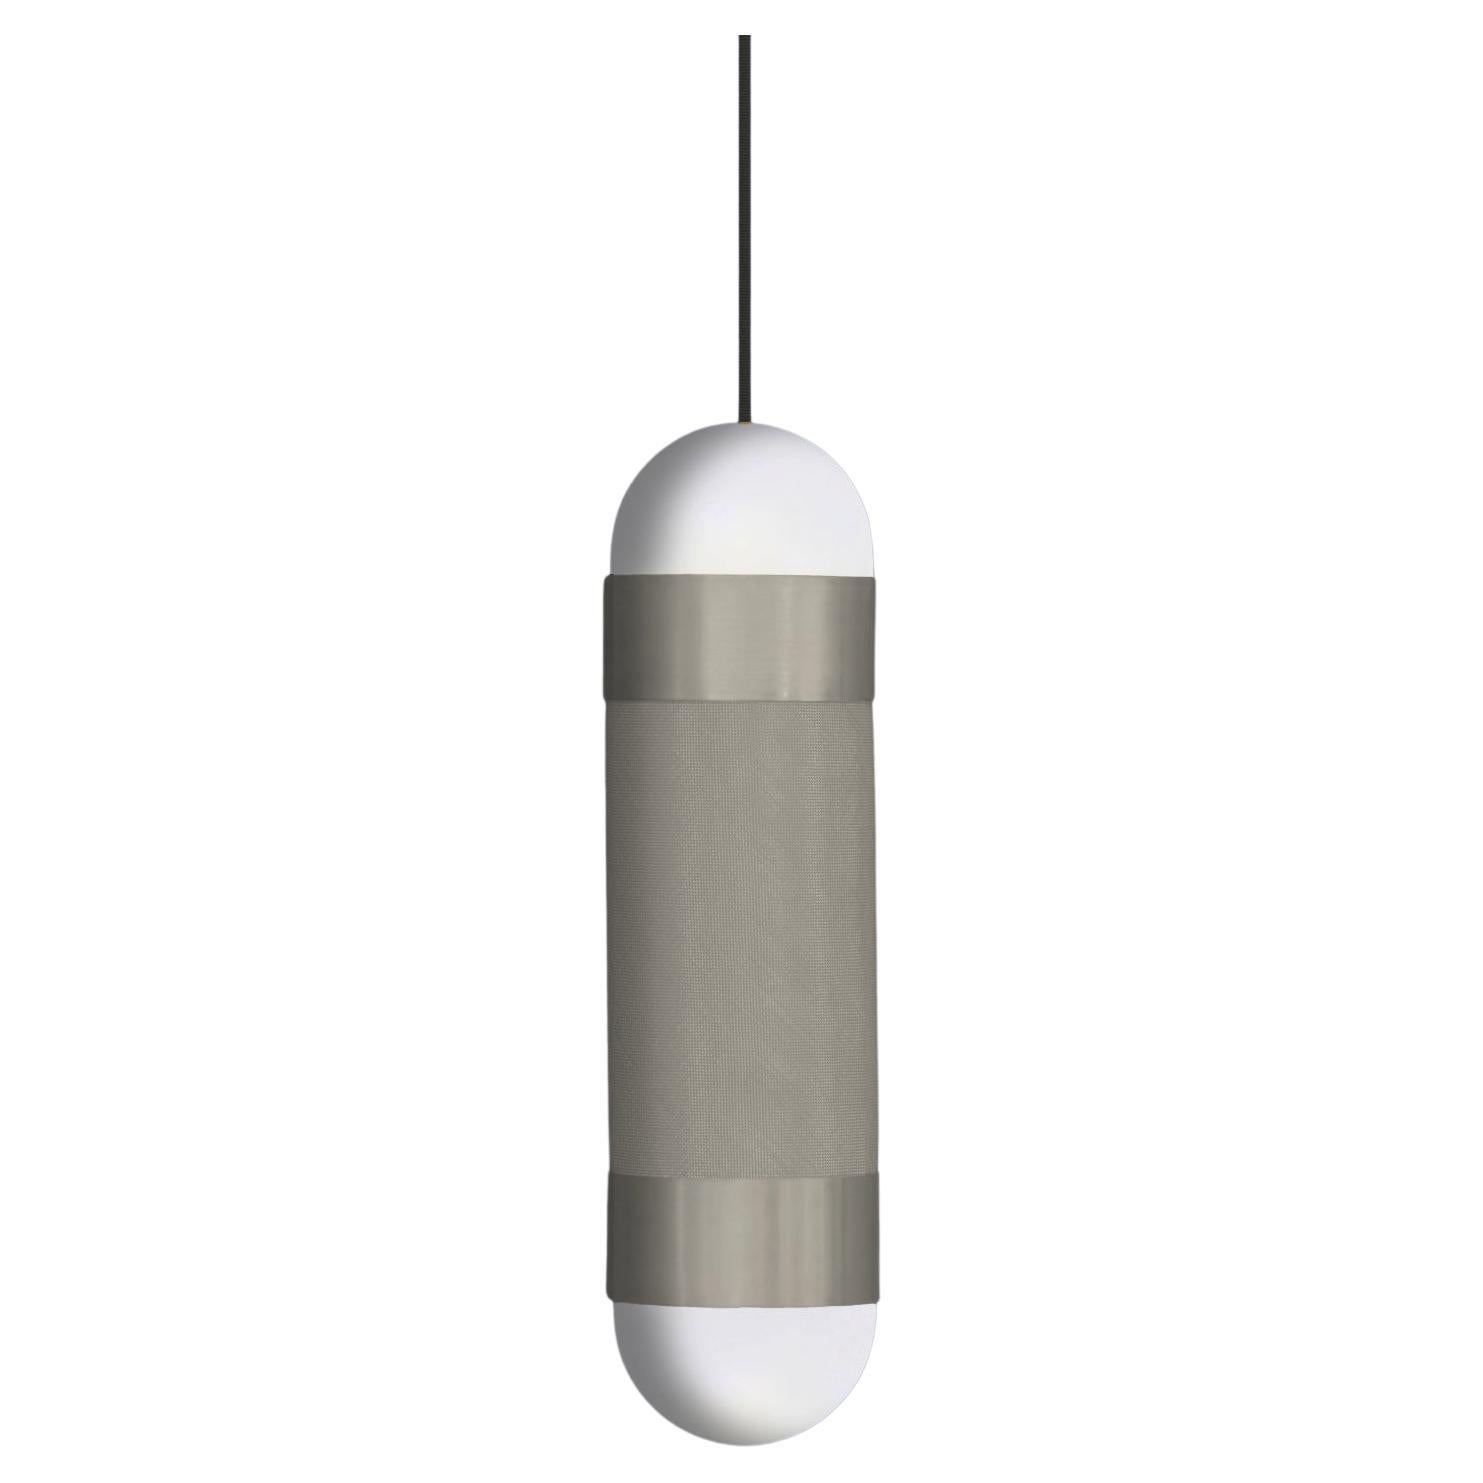 The LOOM pendant light is defined by its signature woven nickel cylinder topped with hand-brushed nickel sleeves and completed with soft-white borosilicate glass domes. When illuminated the LOOM emanates a soft, warm glow through the nickel weave,